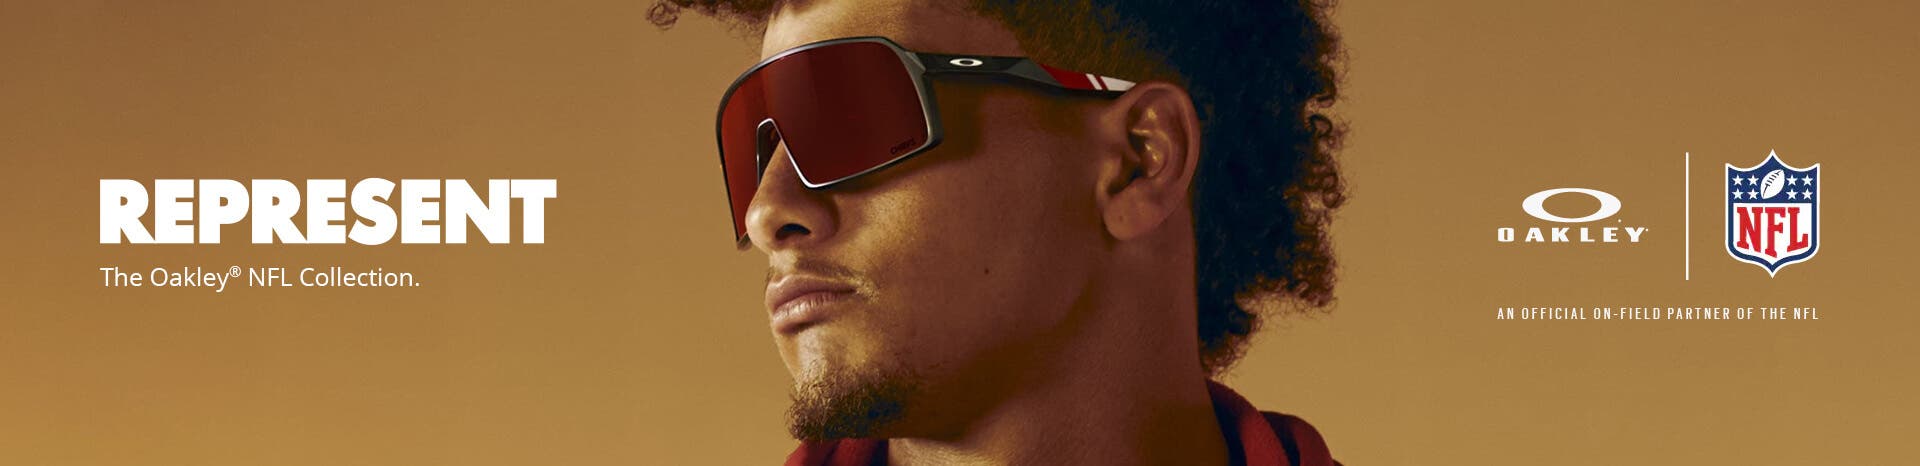 oakley nfl collection, nfl sunglasses